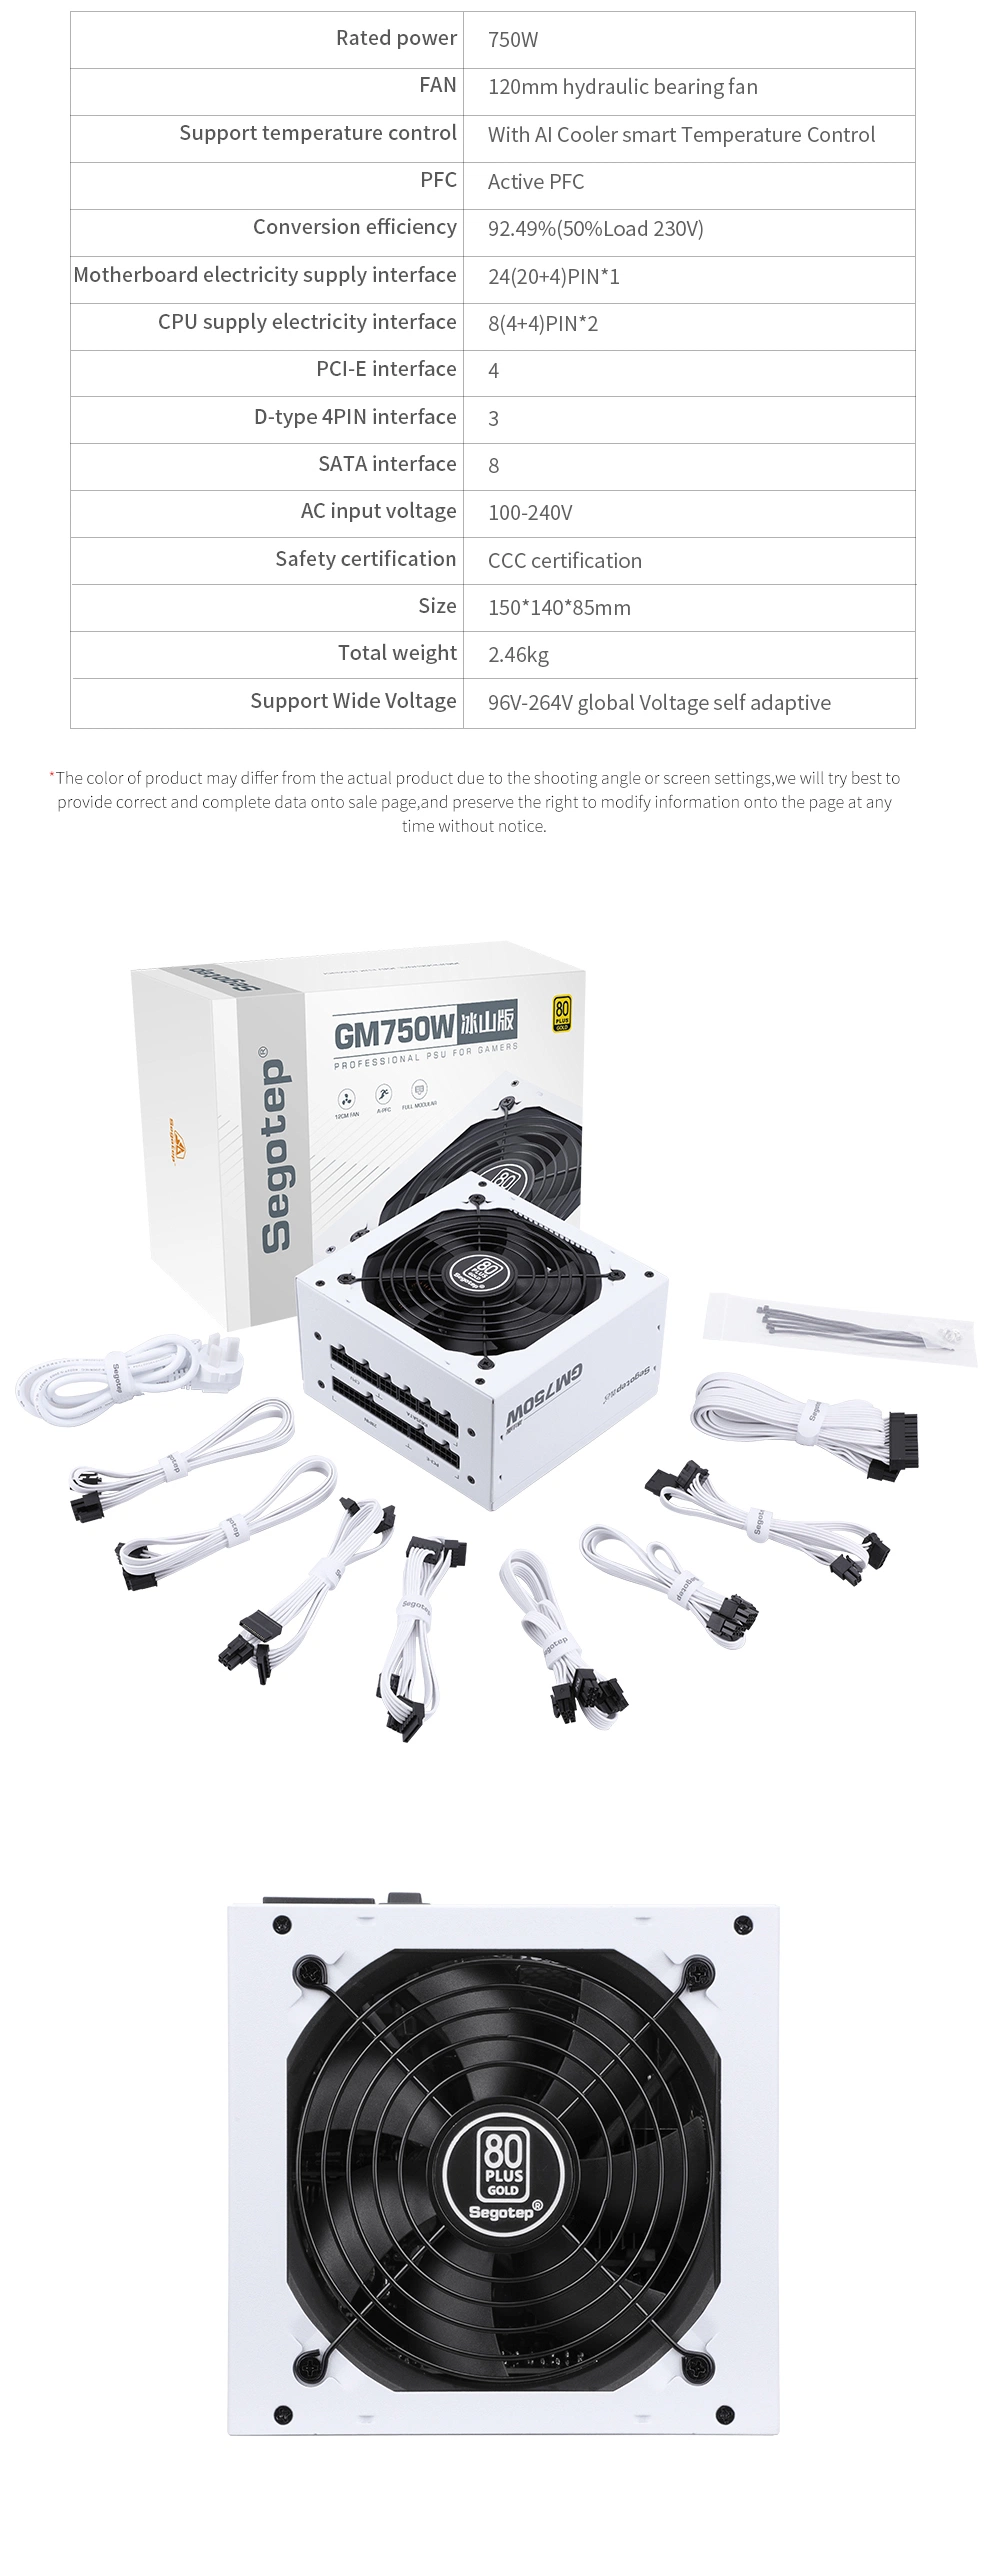 Segotep-GM750W White-80-Plus-Gold-Full-White-Color-Modular-ATX-Switching-Power-Supply-Used on-DIY Desktop-Computer